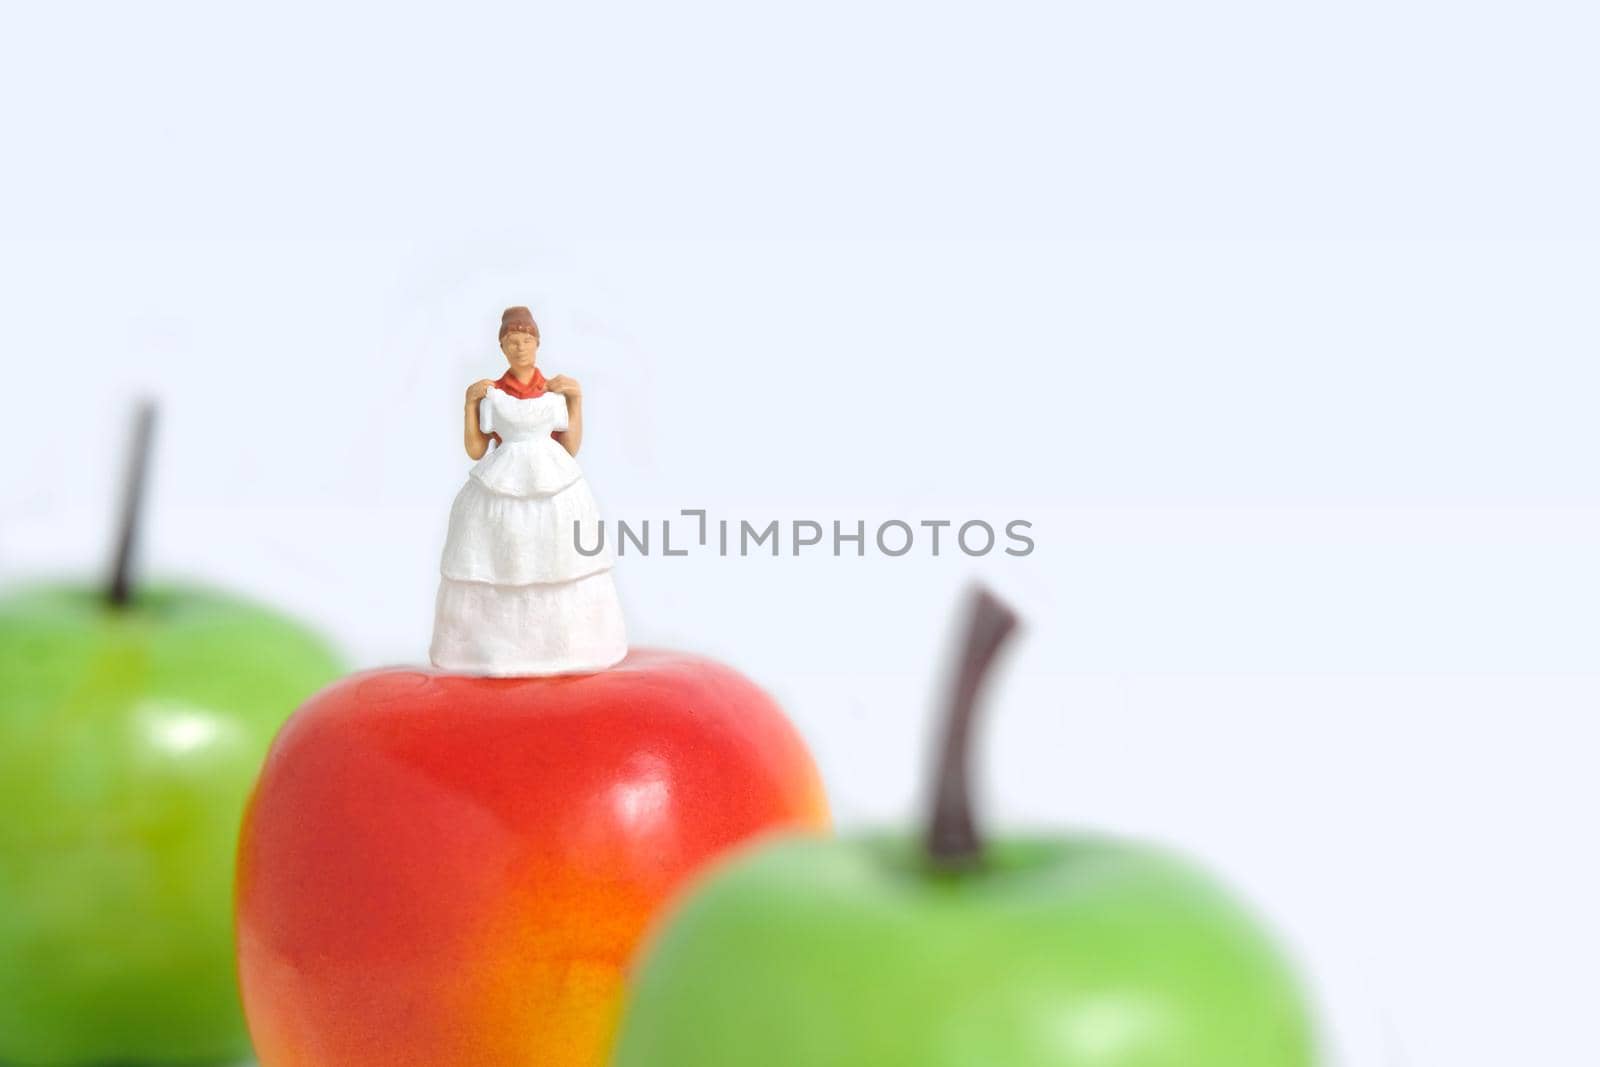 Diet plan before wedding or marriage day concept. Woman standing above apple with trying wedding dress. Miniature people, toys photography. by Macrostud